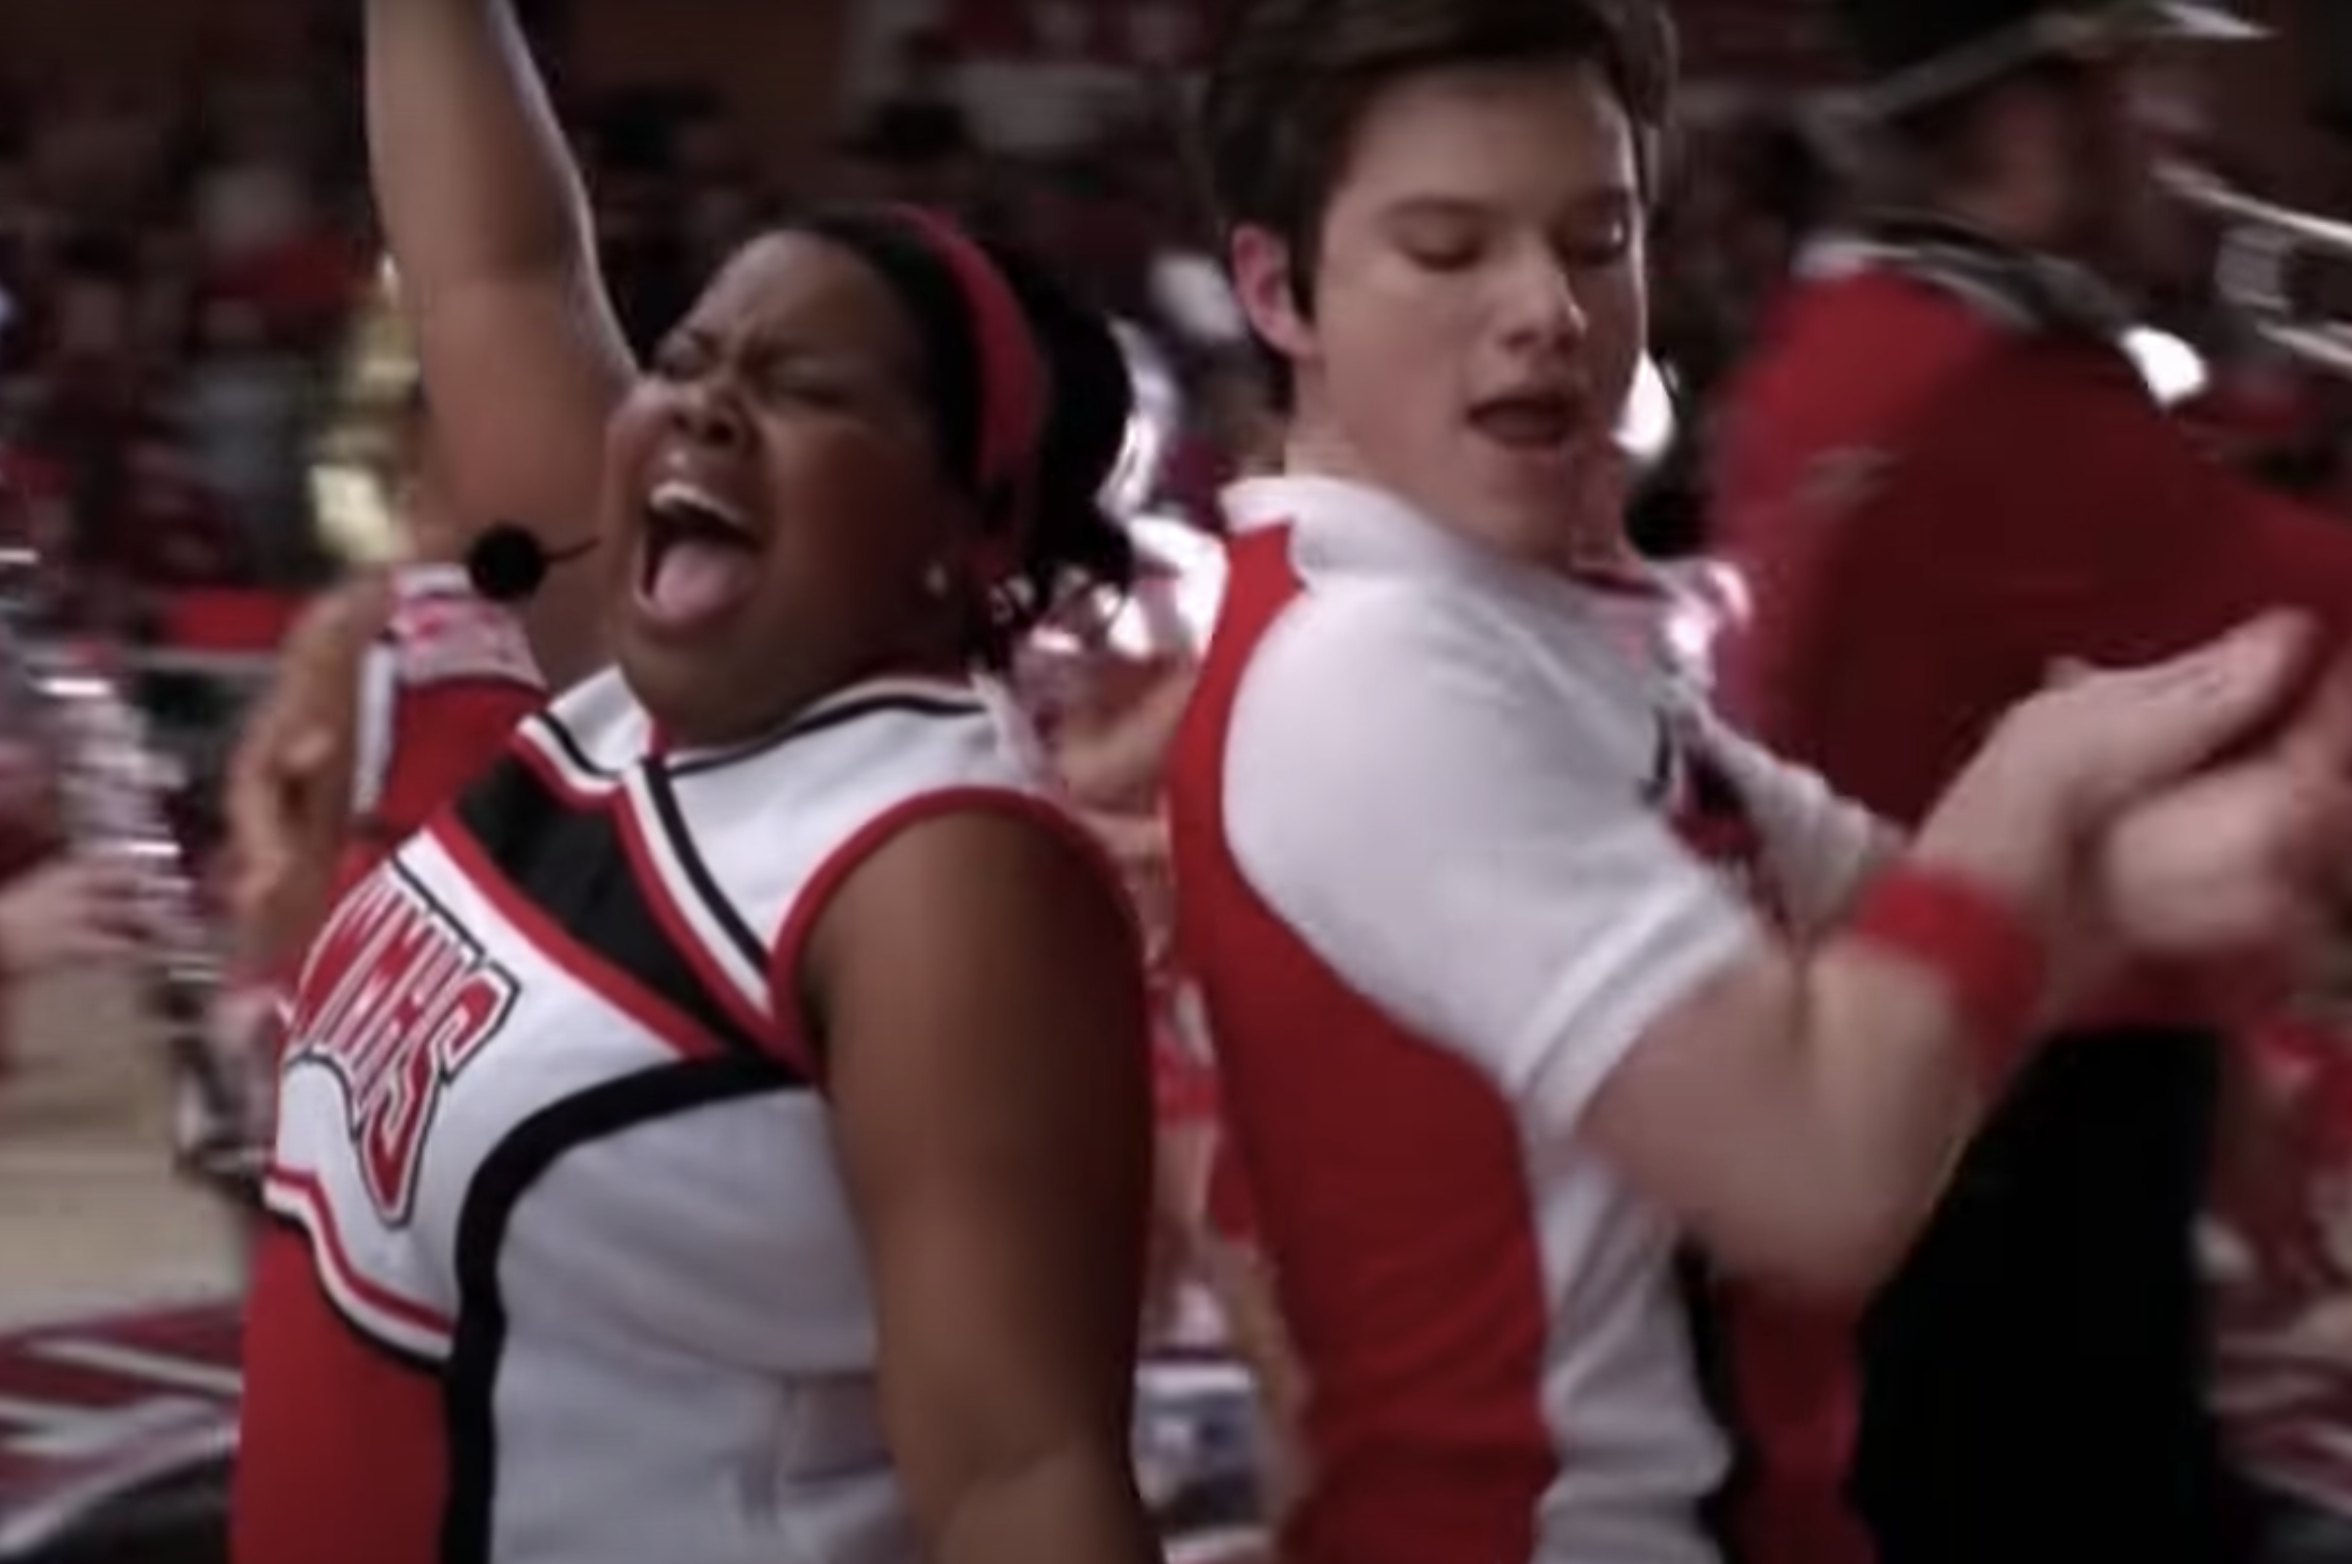 Mercedes and Kurt in Cheerios uniforms singing and performing with the Cheerios